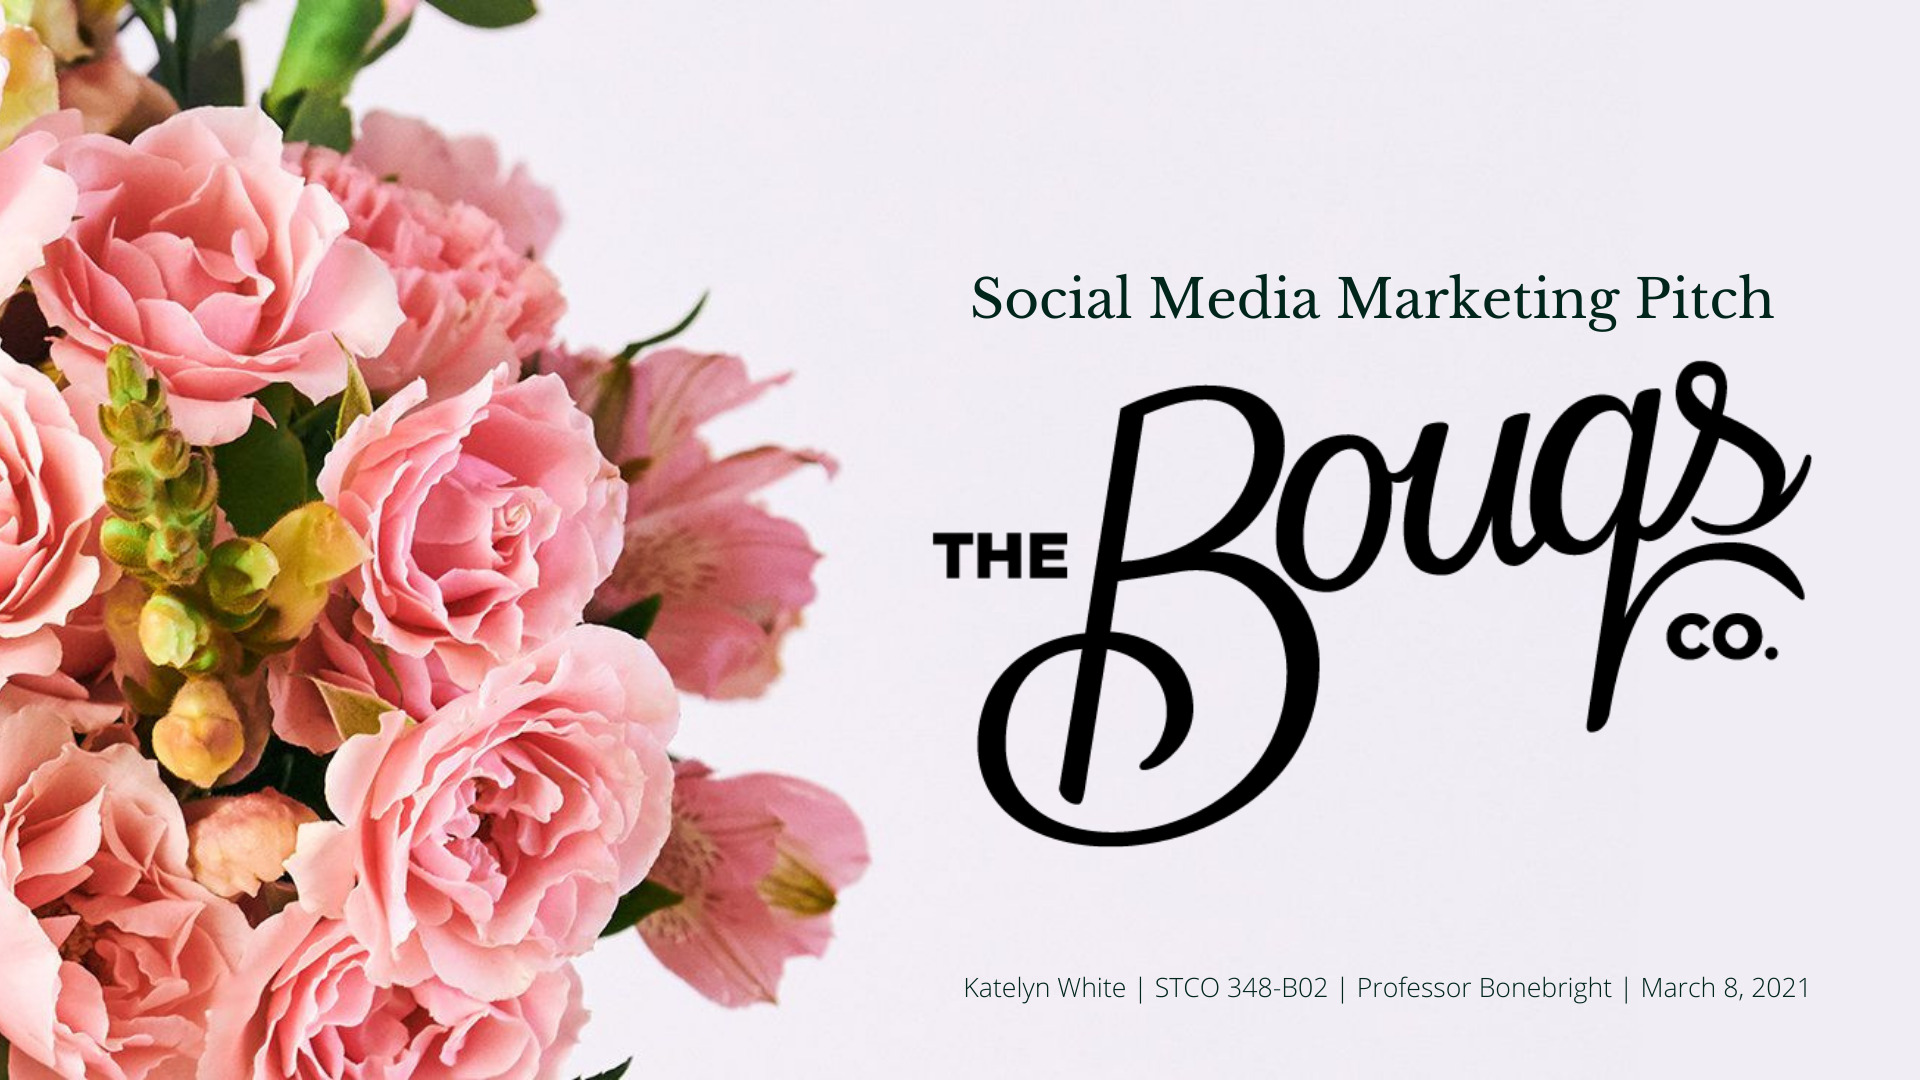 Featured image for “Social Media Marketing – The Bouqs Company”